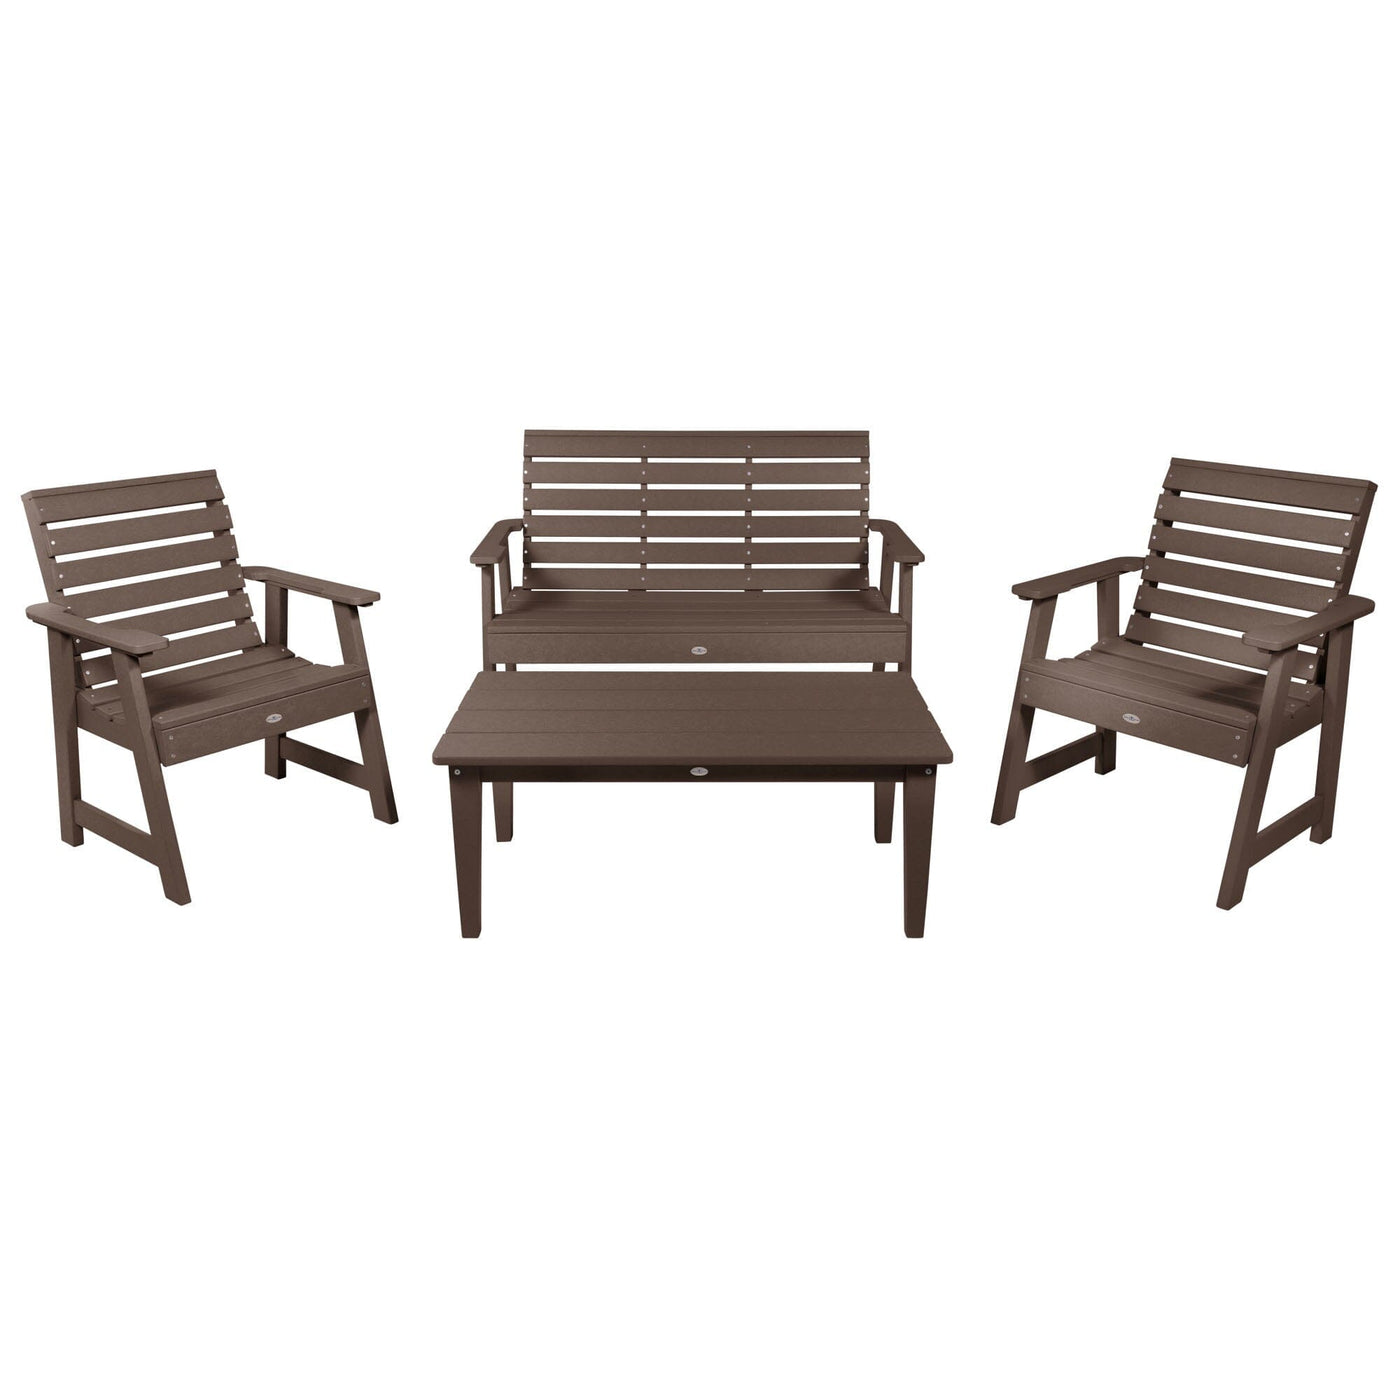 Riverside Garden Bench 4ft, 2 Garden Chairs, and Conversation Table Set Kitted Set Bahia Verde Outdoors Mangrove Brown 